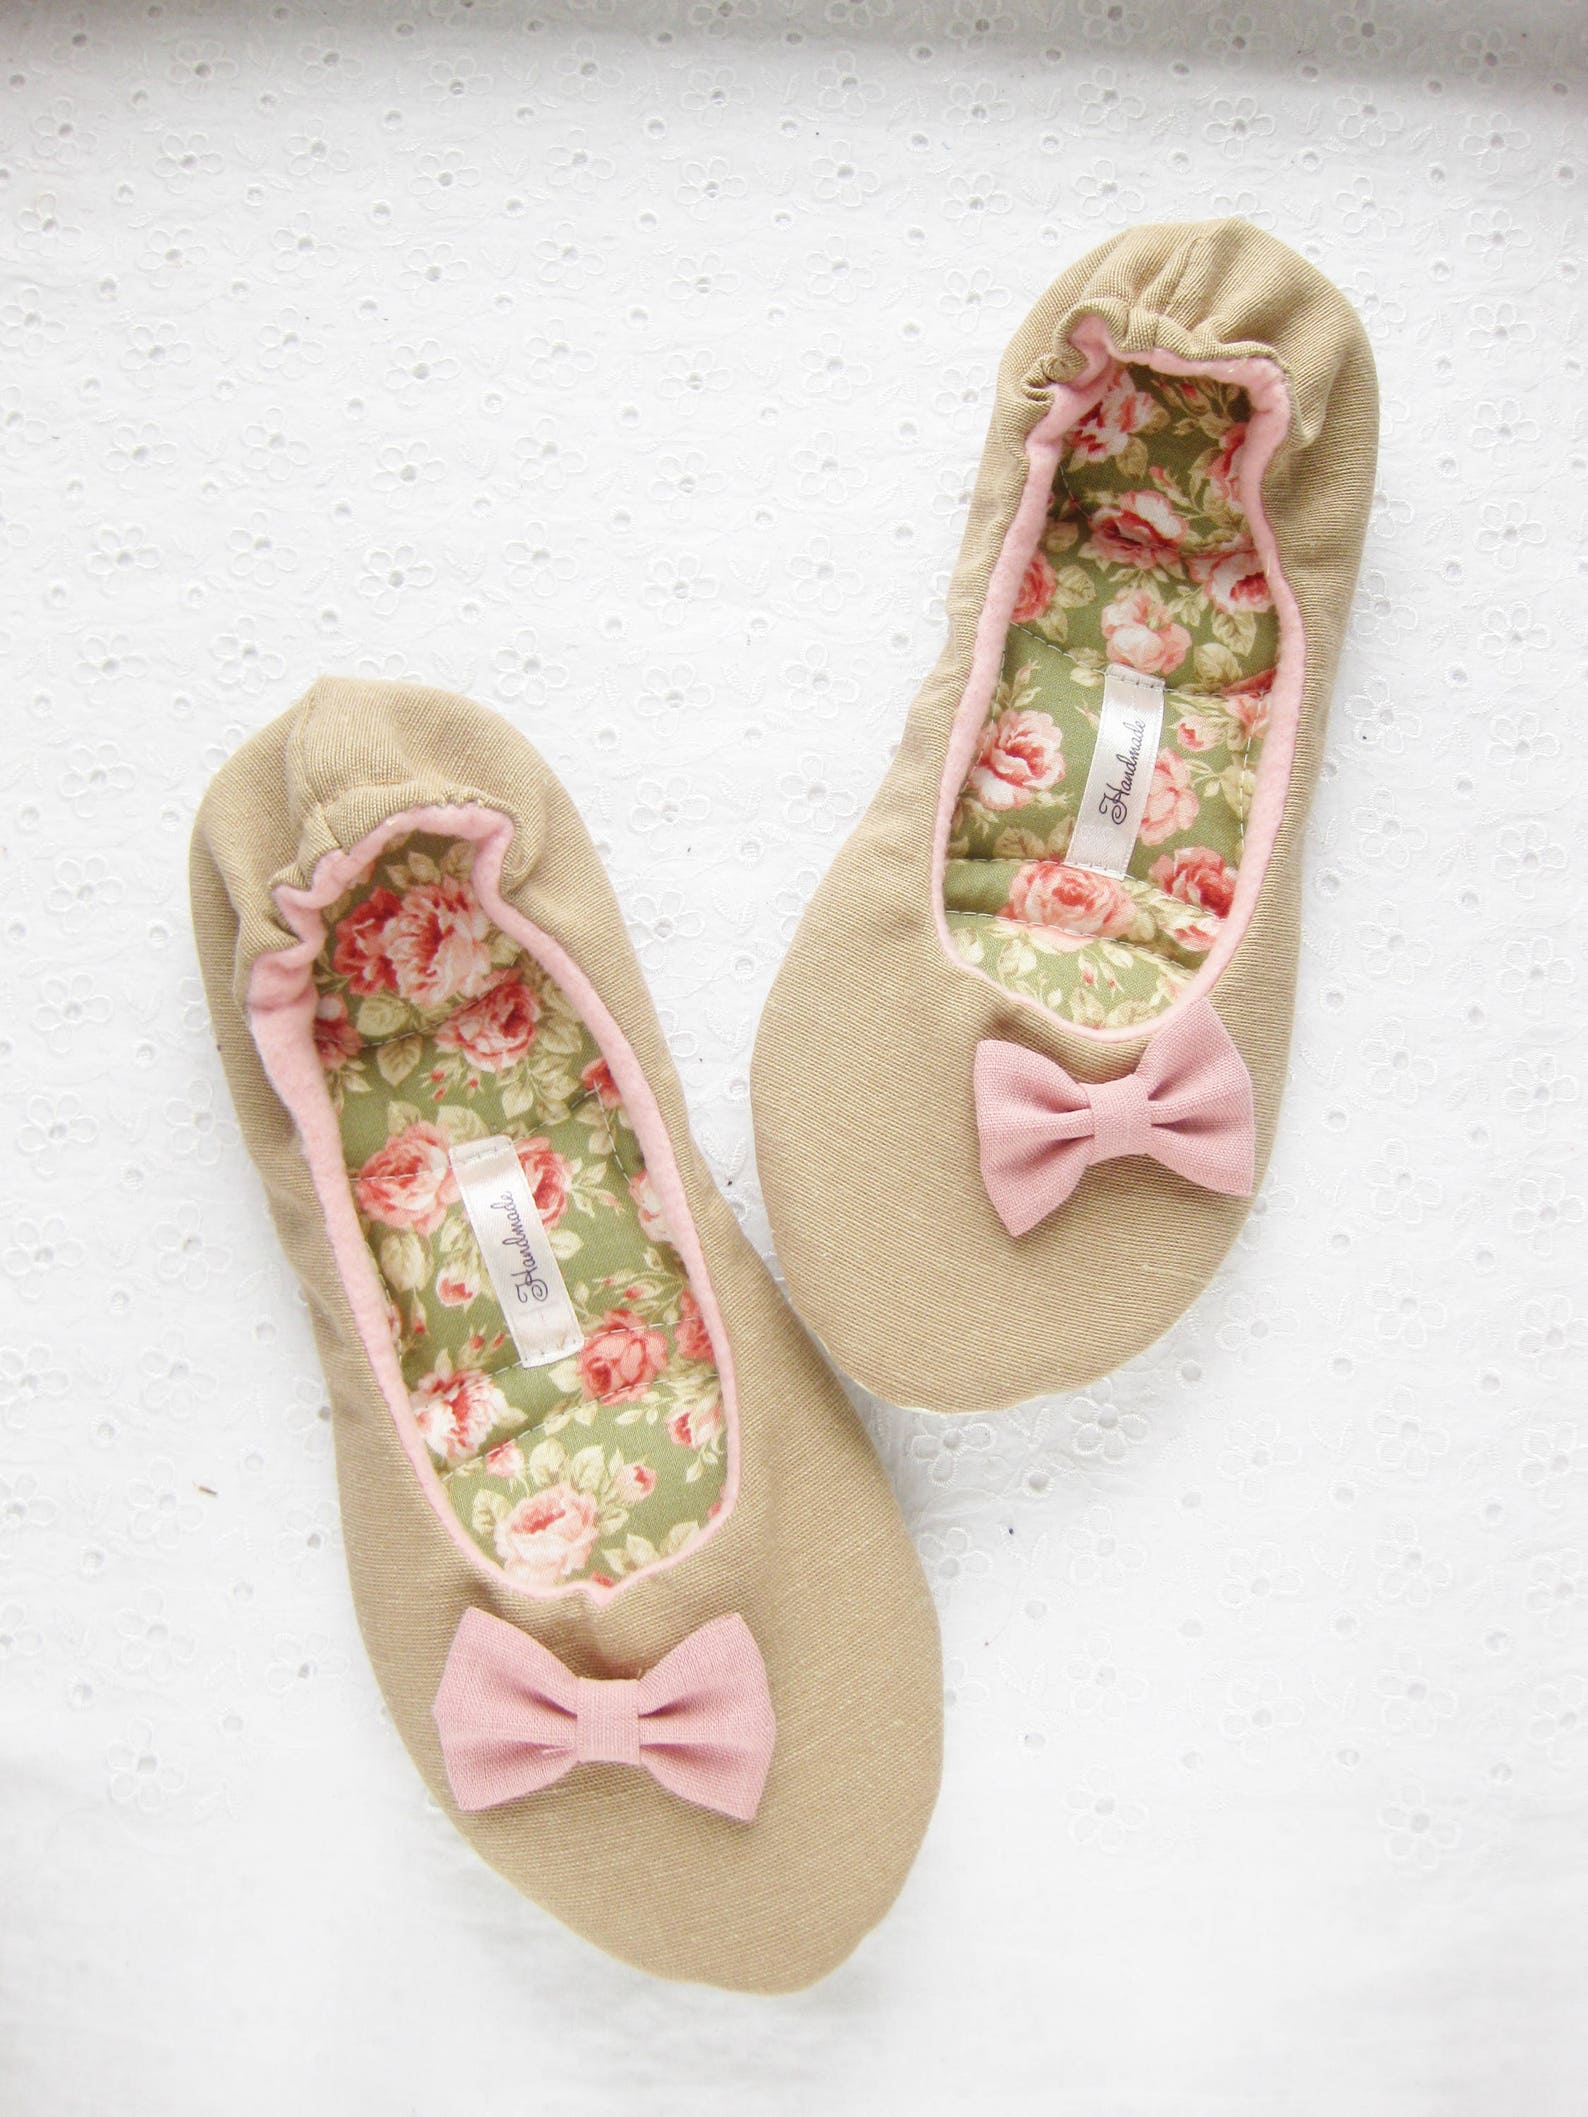 old fashioned ladies slippers